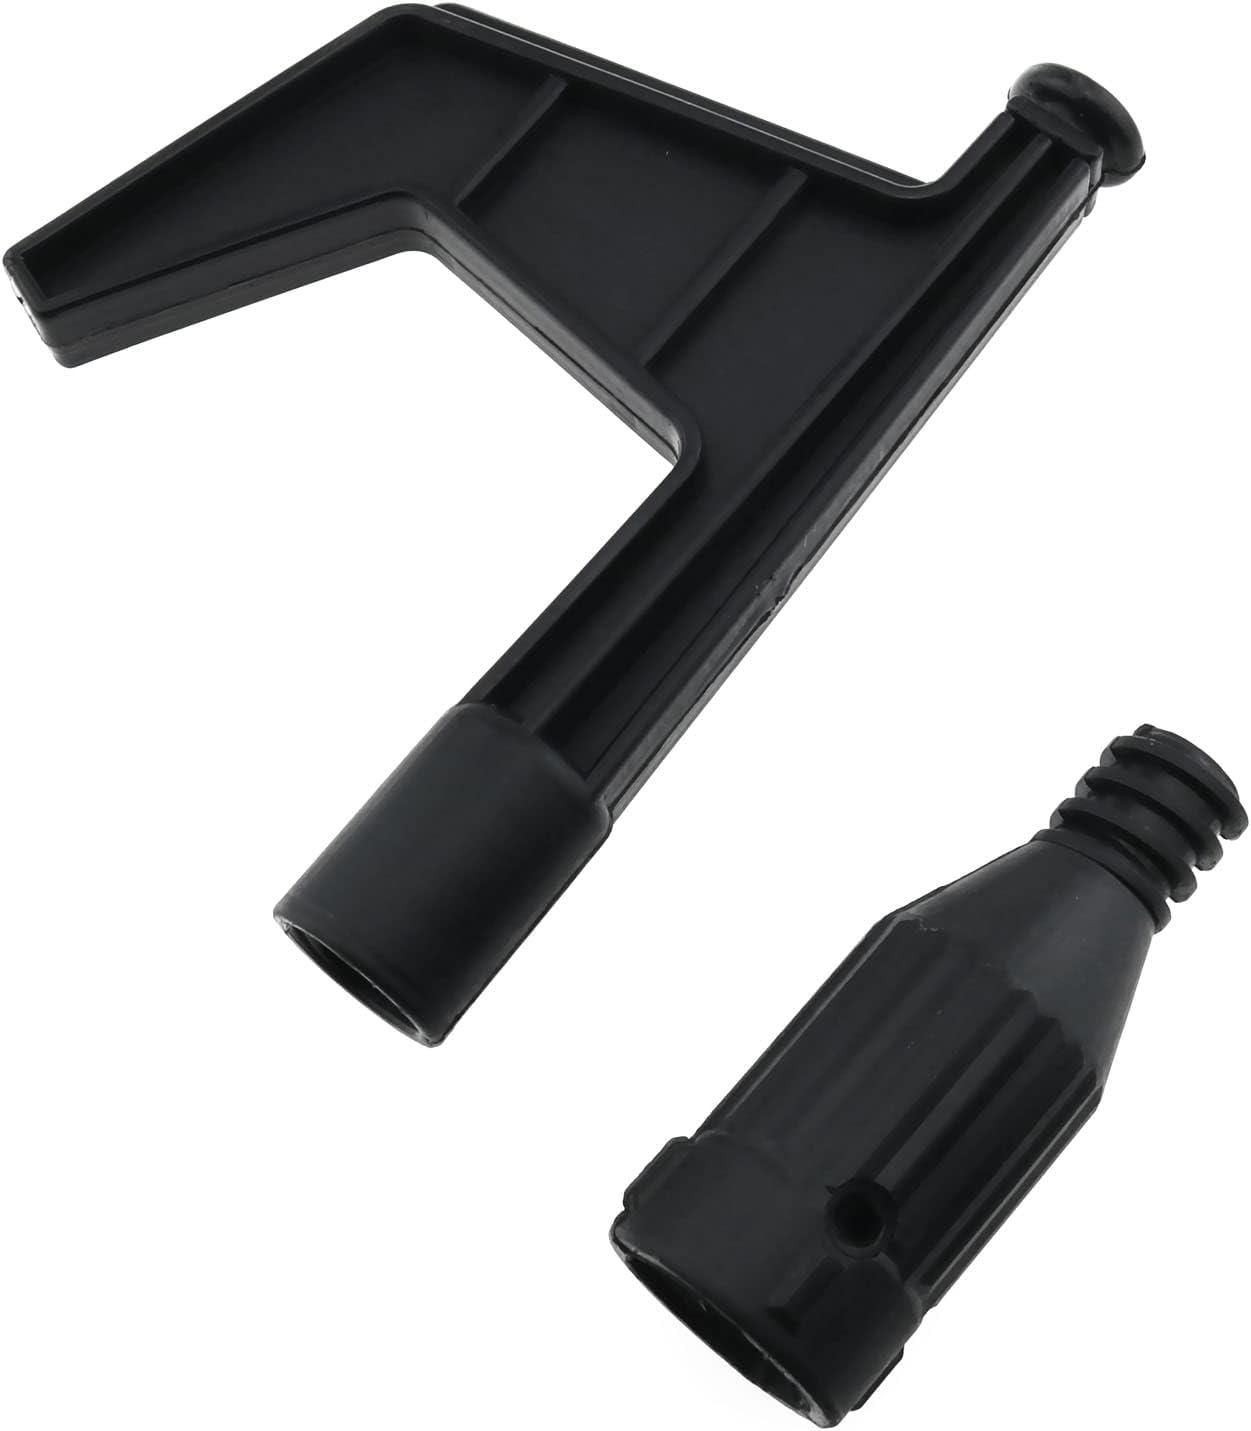 Boat Hook Tip / Plastic product images